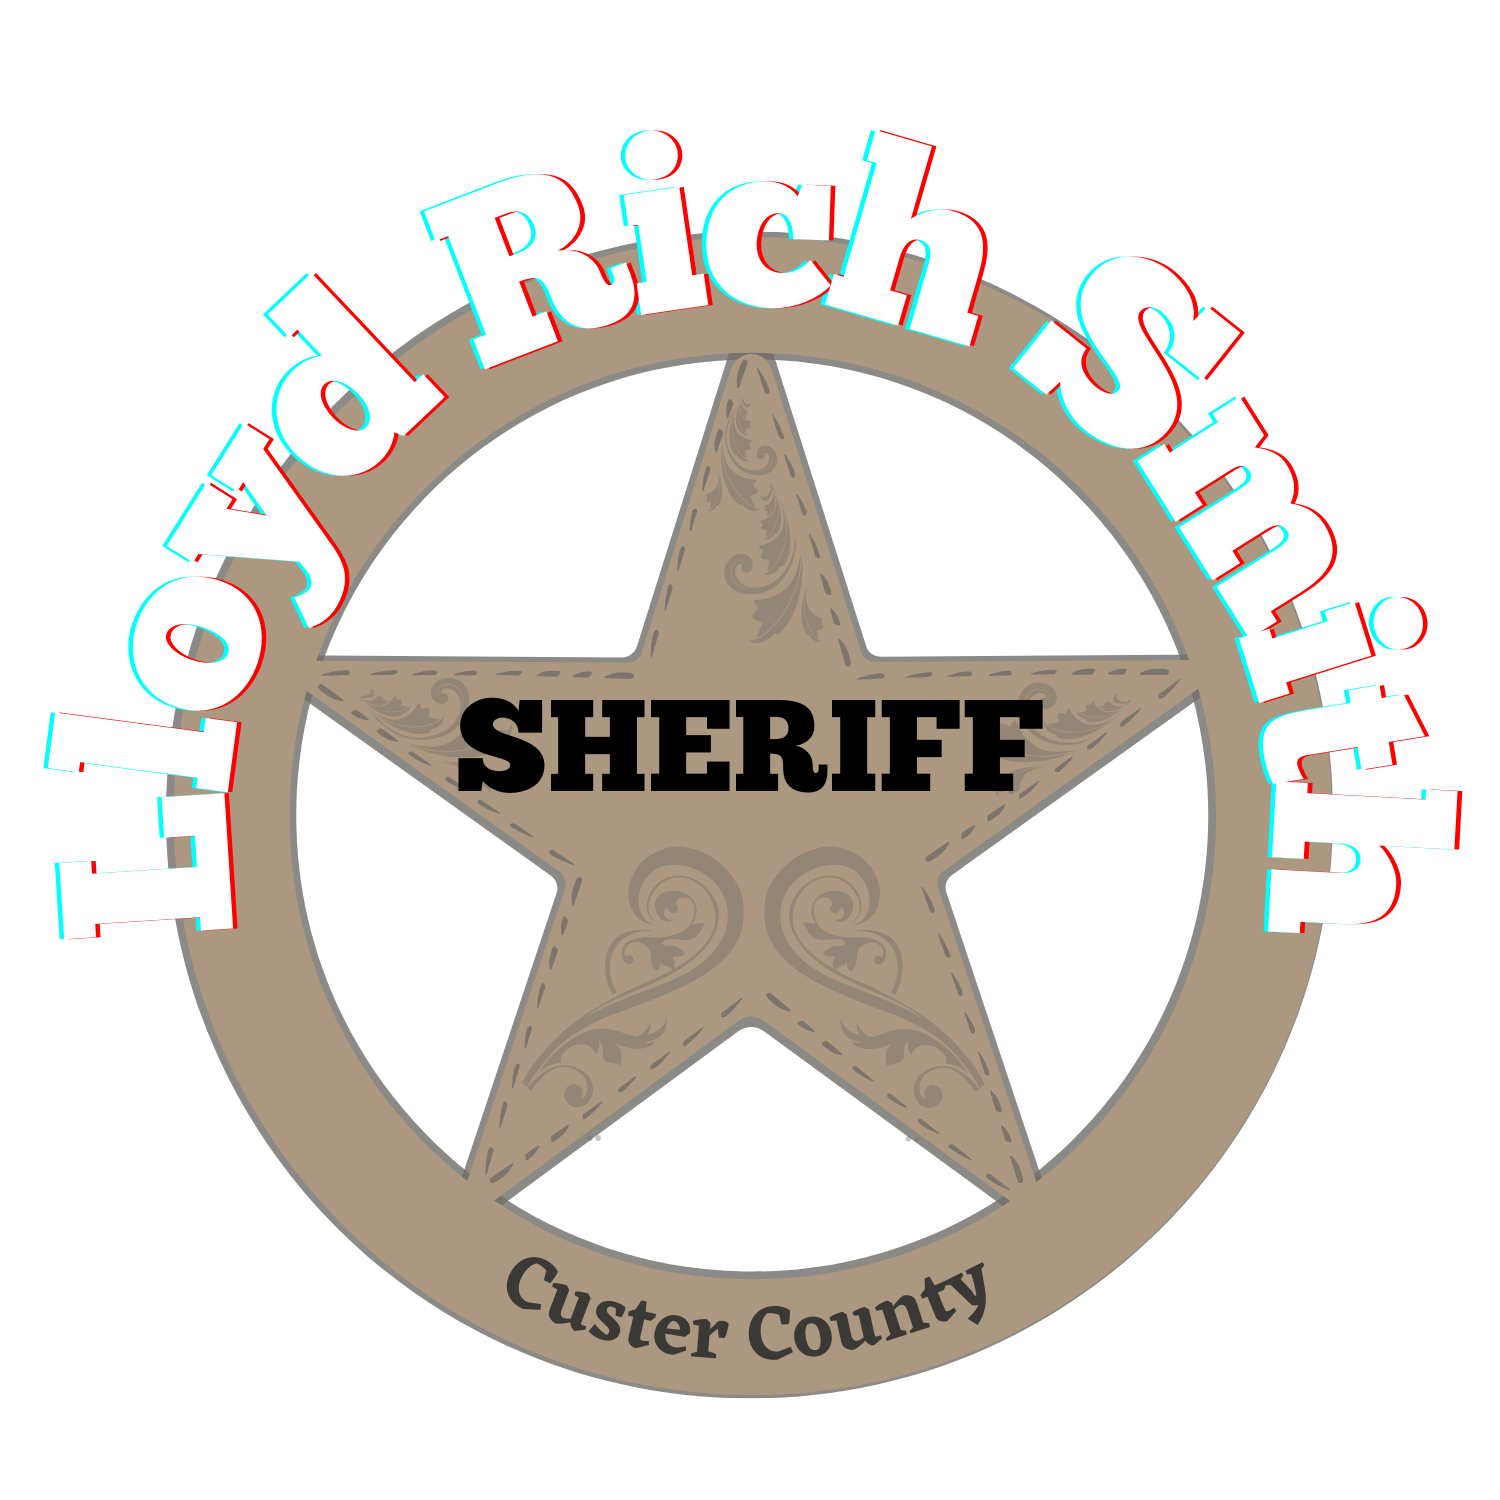 Rich Smith for Sheriff